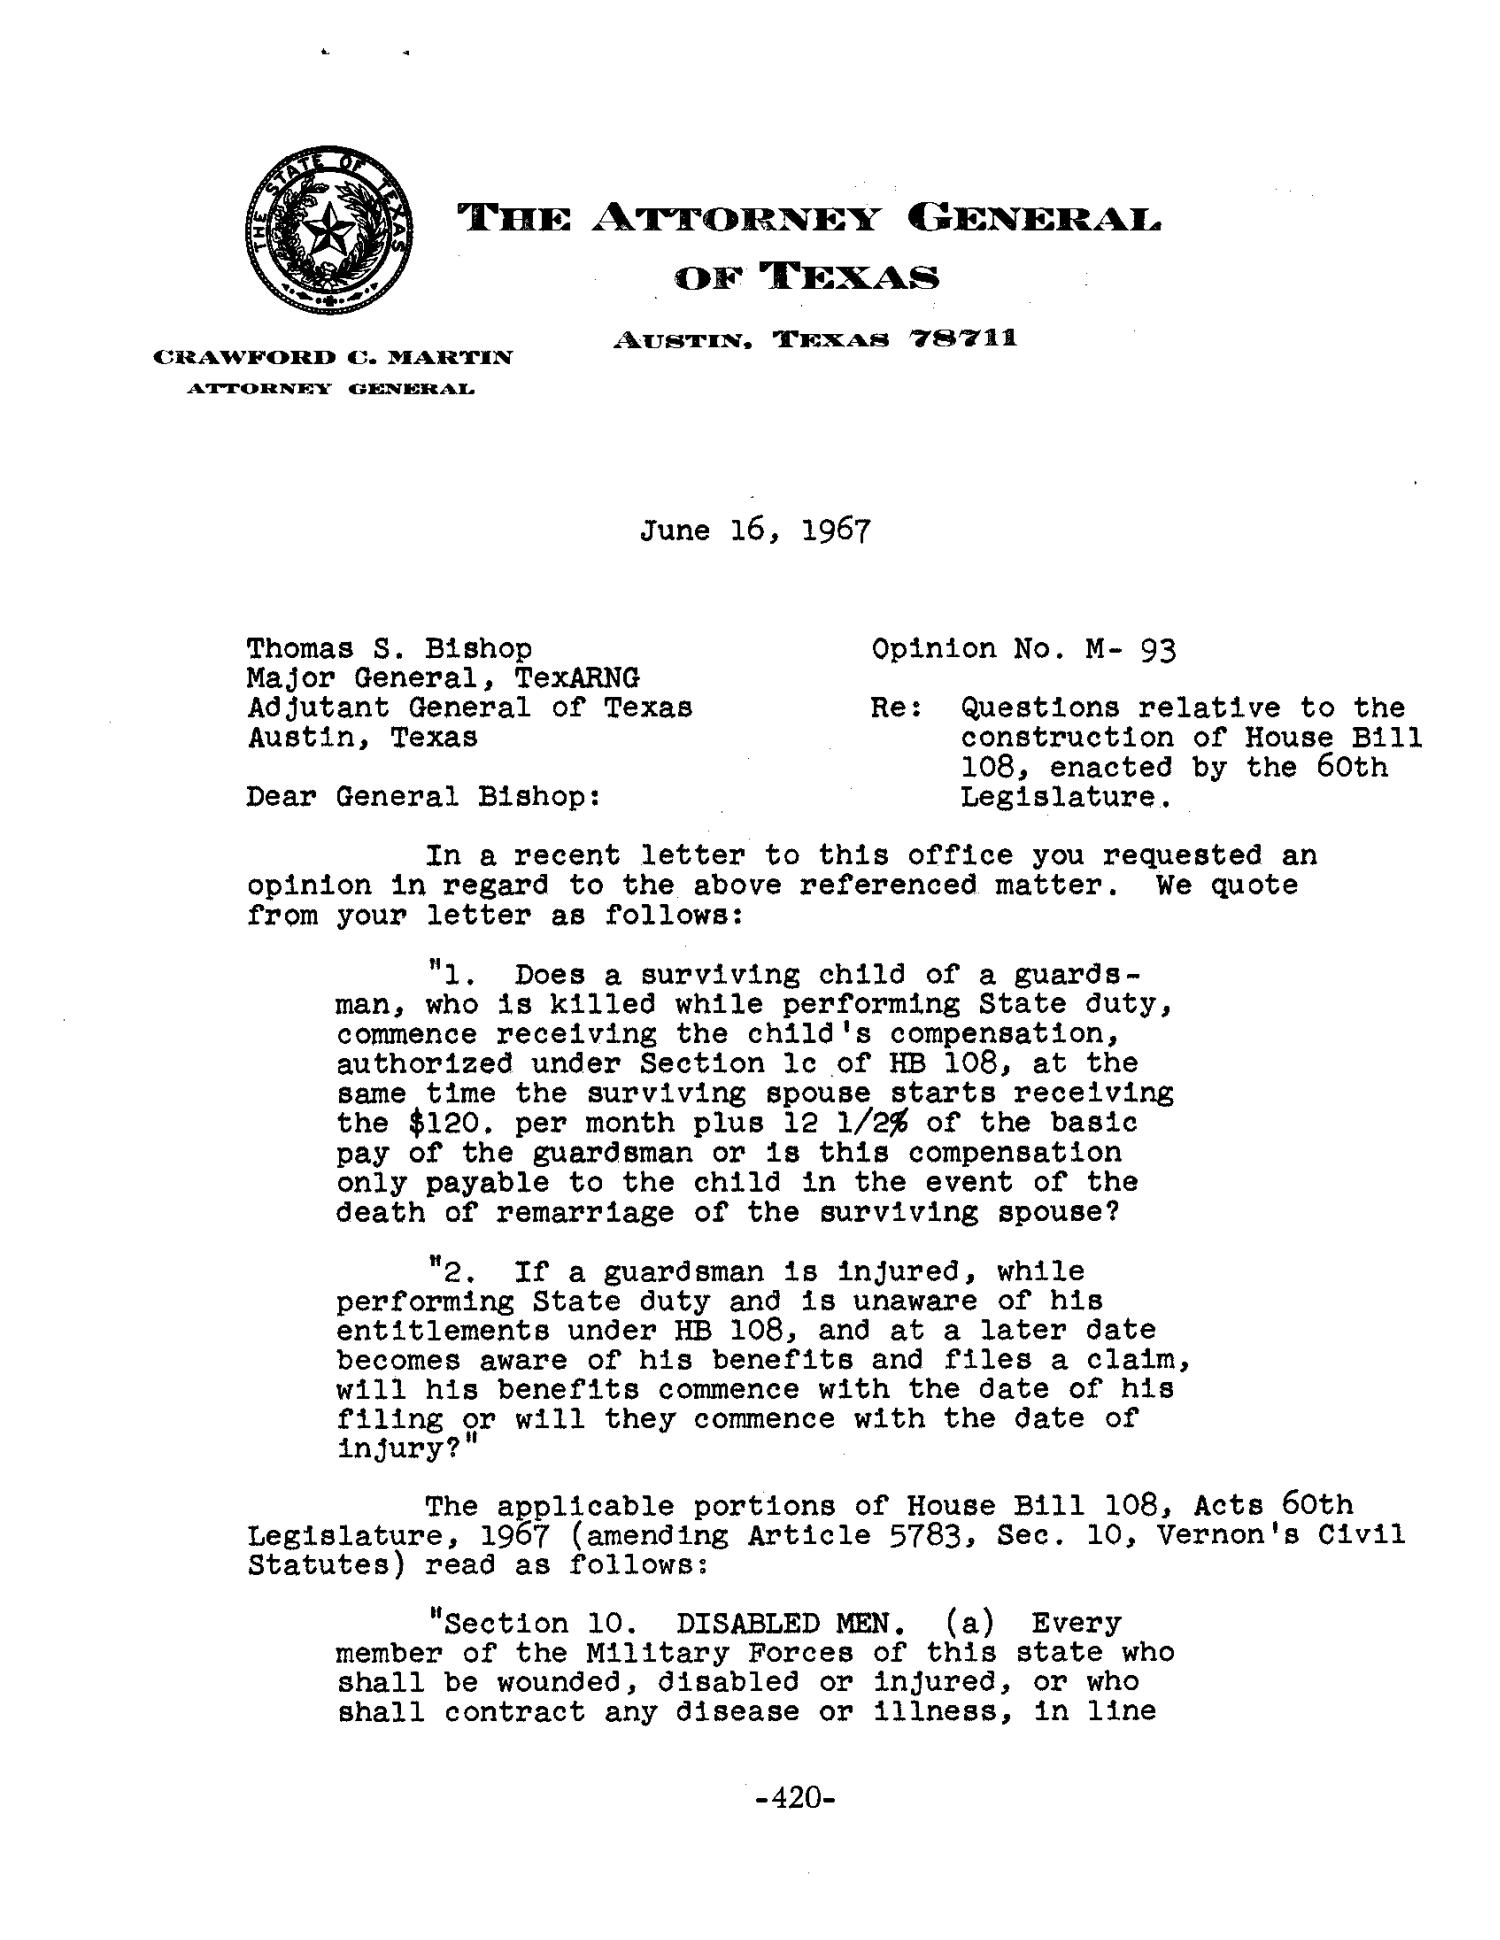 Texas Attorney General Opinion: M-93
                                                
                                                    [Sequence #]: 1 of 4
                                                